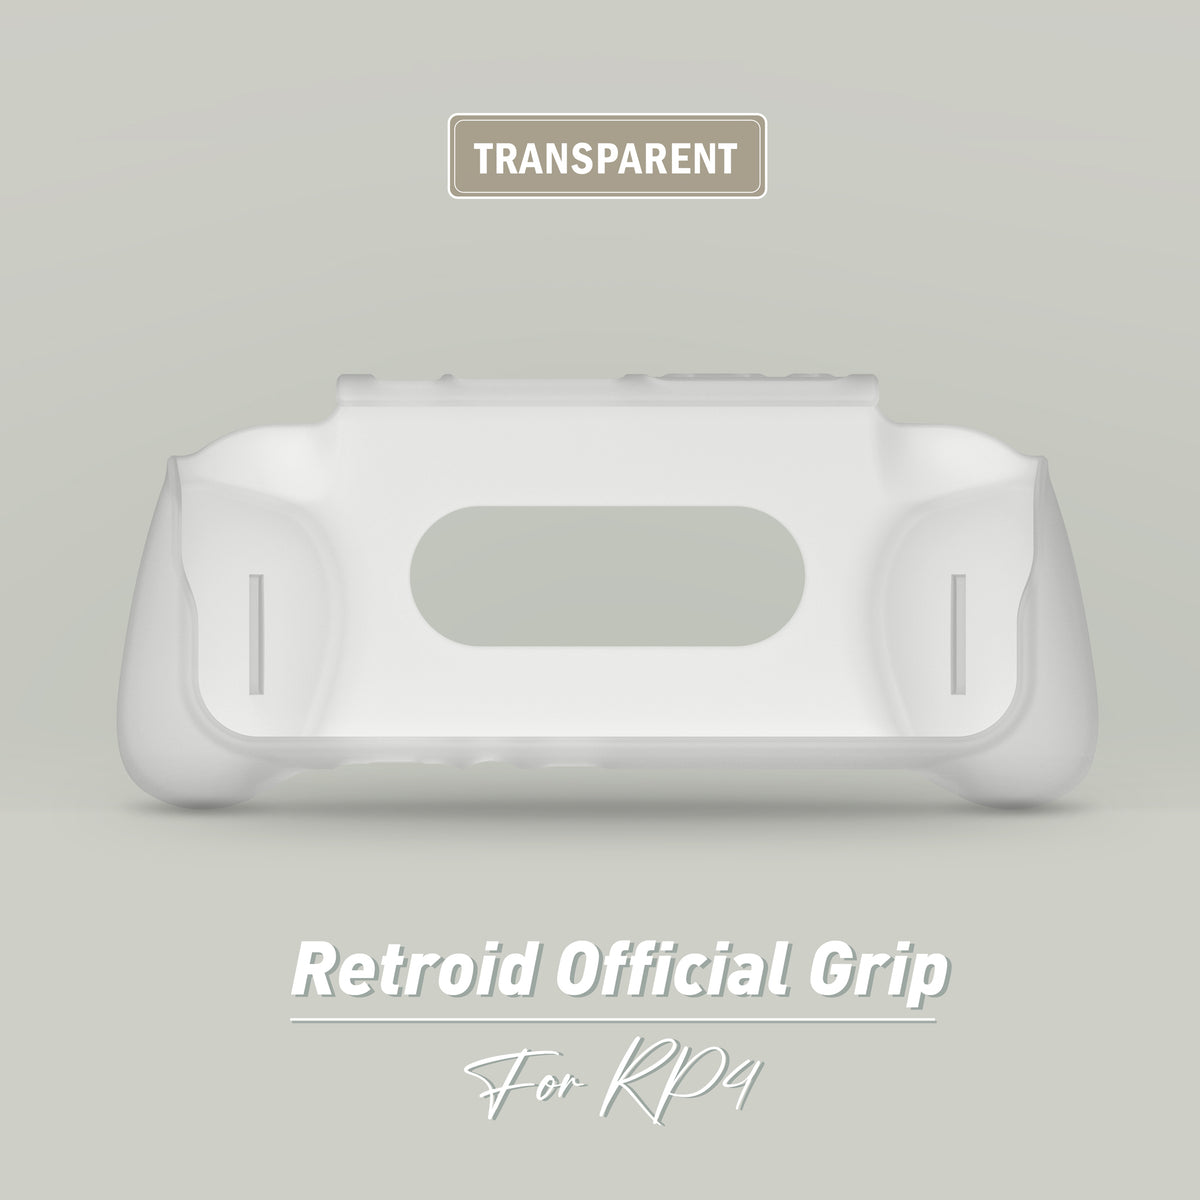 Retroid Official Grip for RP4/4Pro – Retroid Pocket